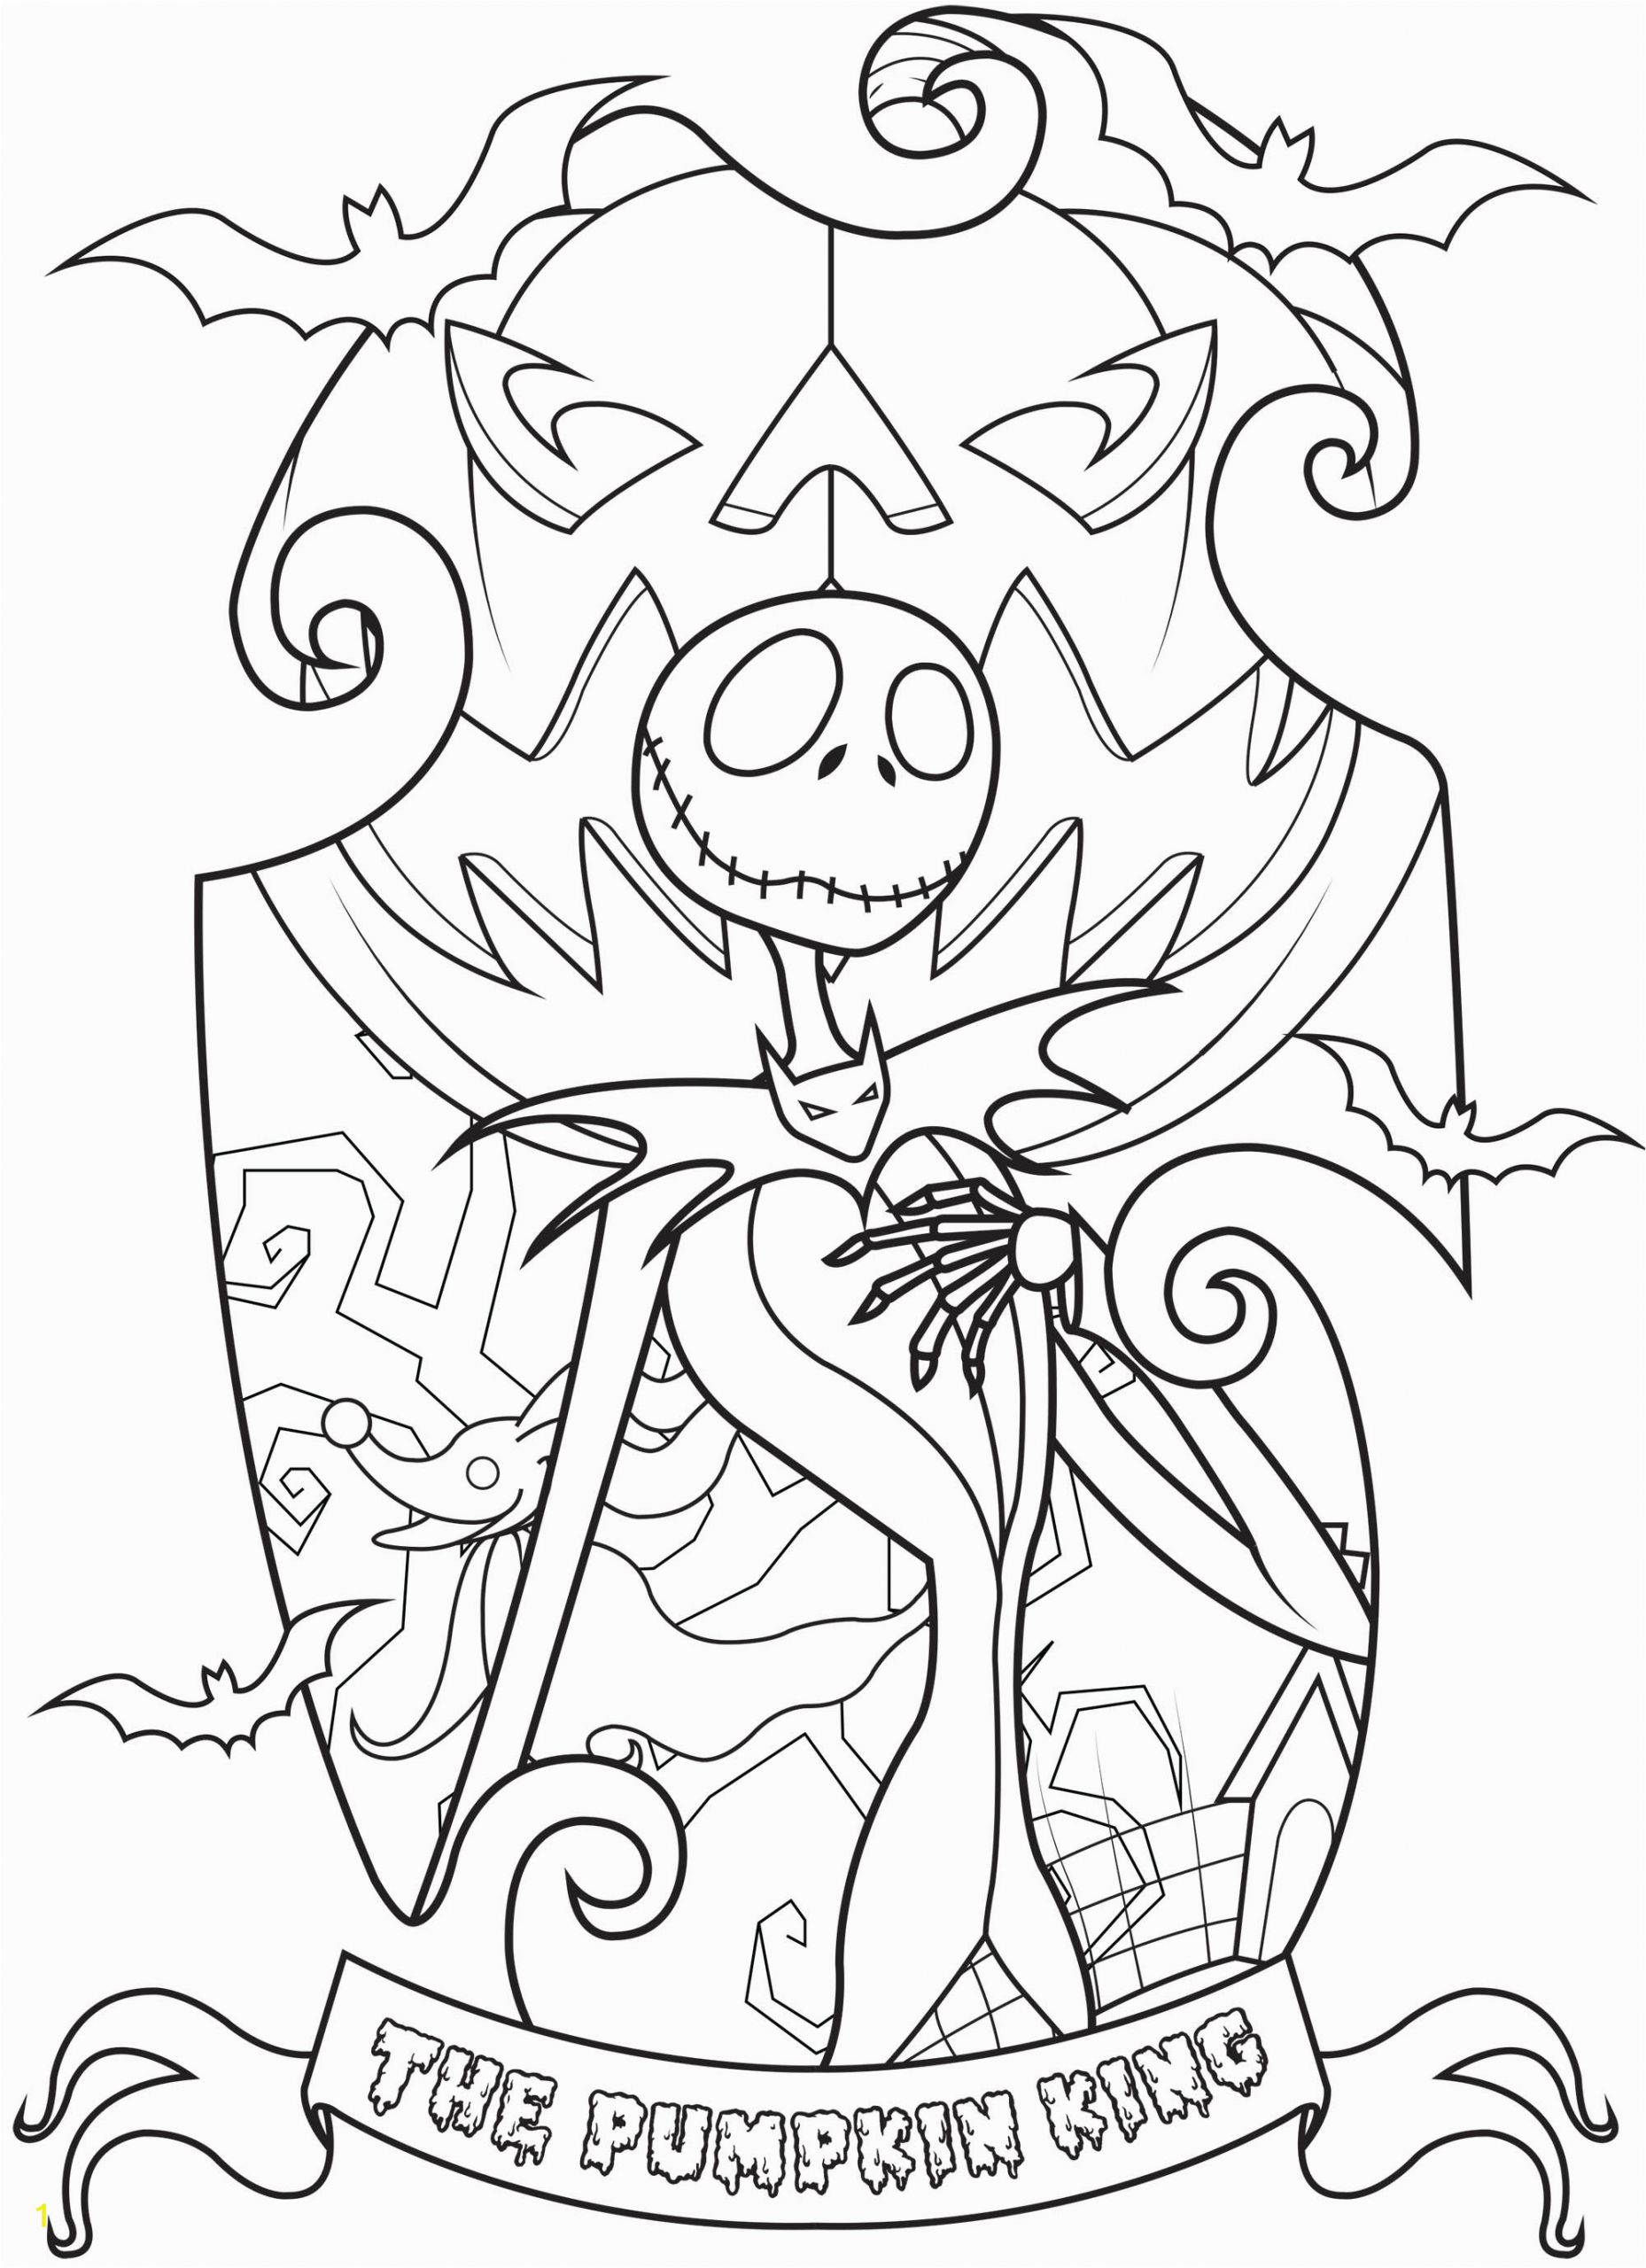 halloween adult coloring pages image=events halloween coloring jack skellington king of halloween town plex 1 1